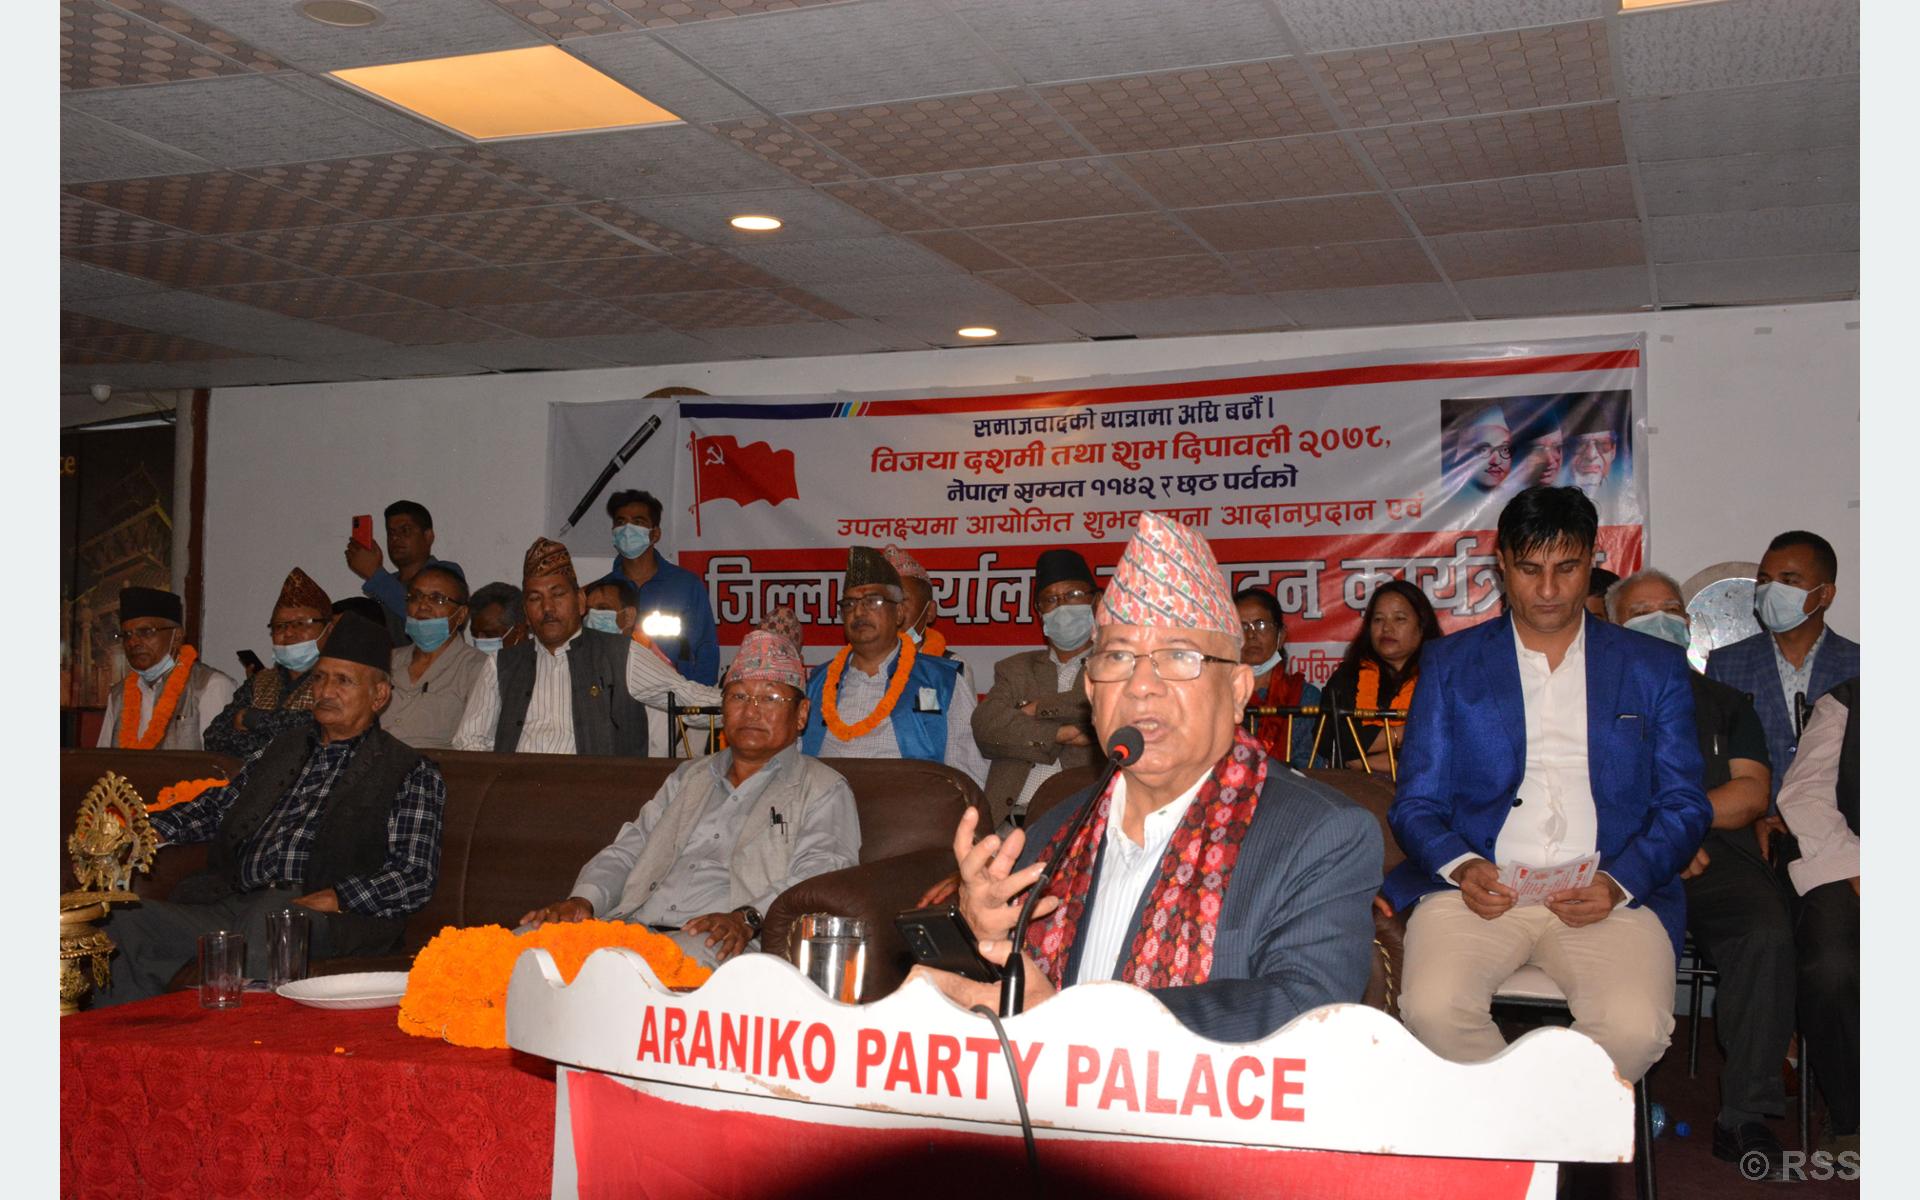 CPN (Unified Socialist) chairman Nepal urges govt to carry out probe into corruption cases